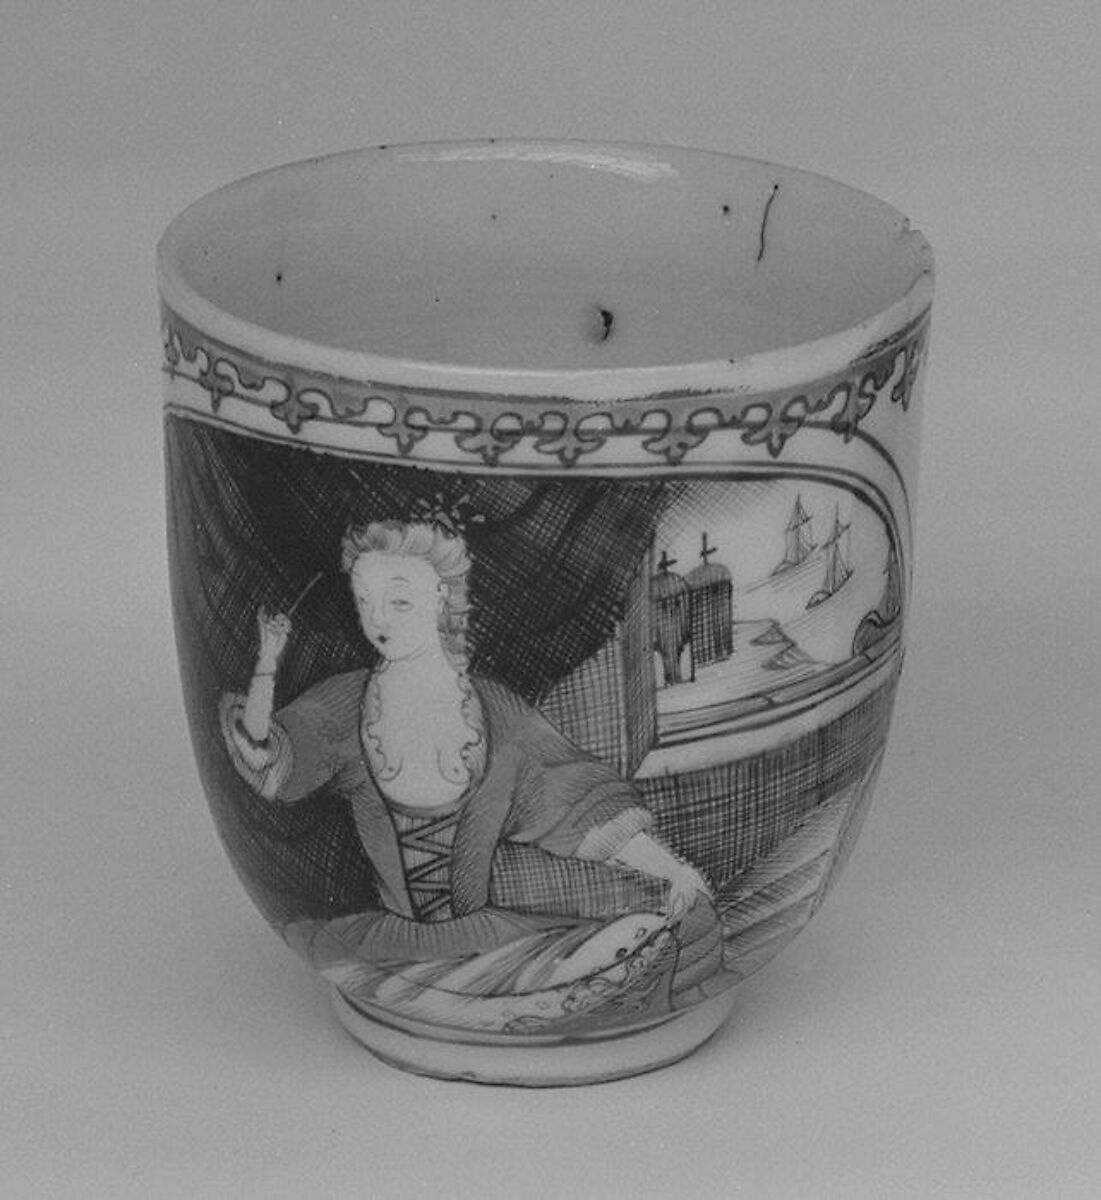 Cup (part of a service) | The for Chinese, Metropolitan | Art Dutch market possibly Museum of